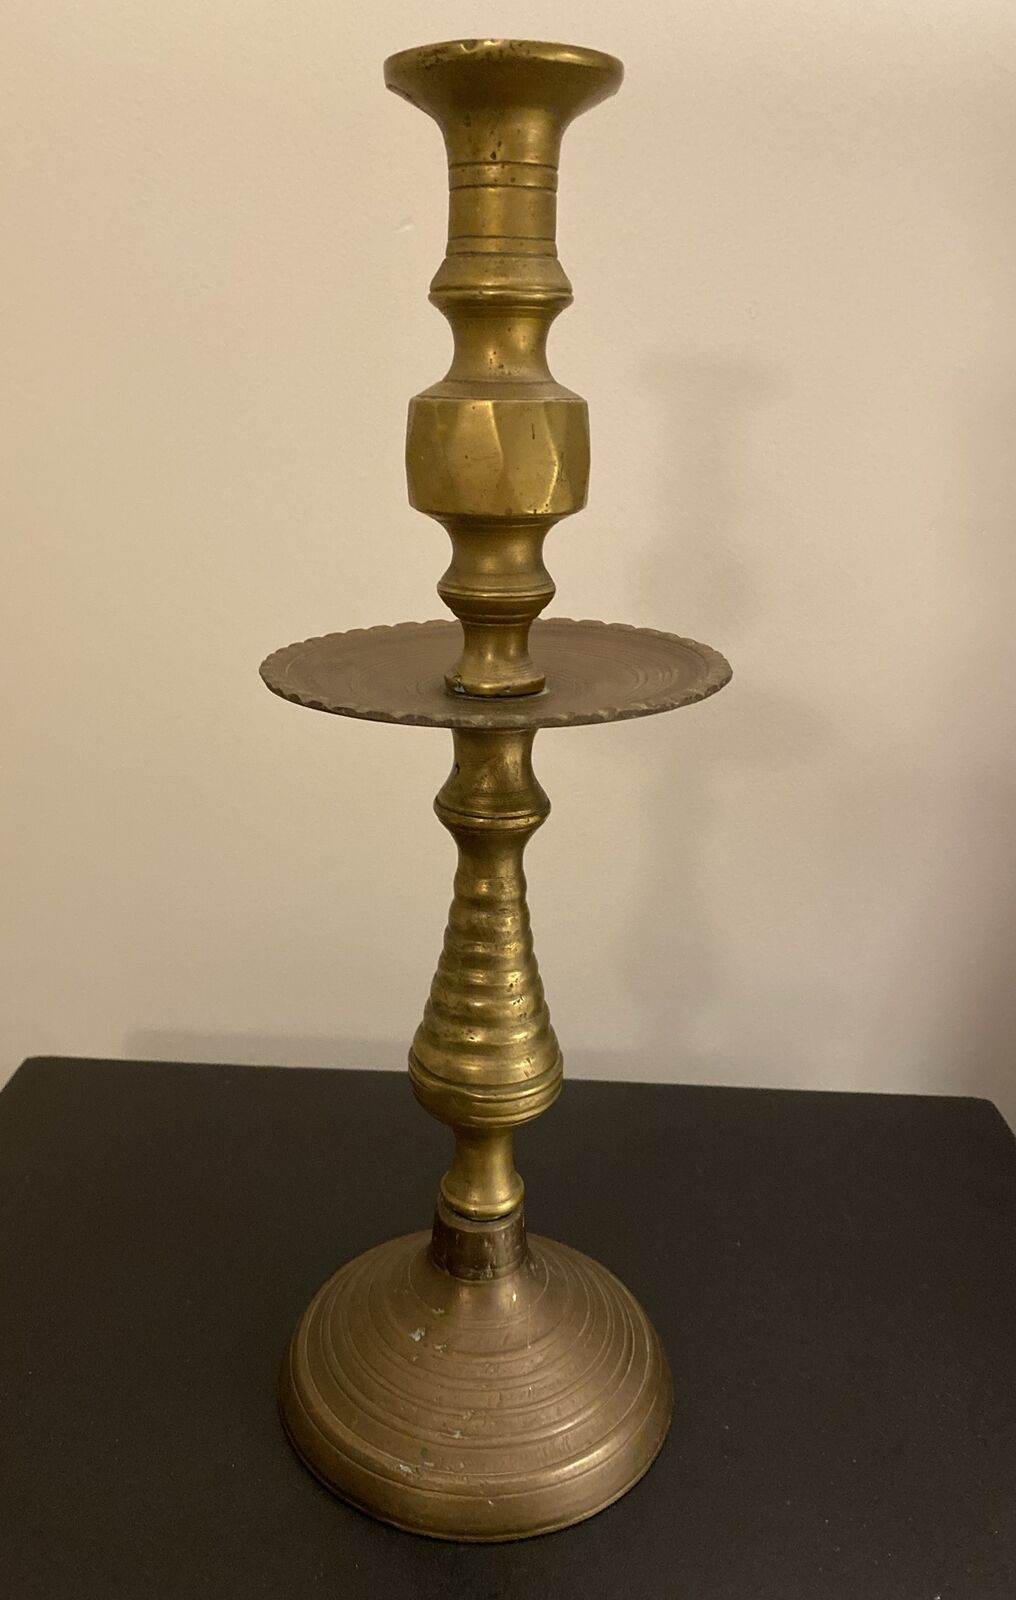 Vintage Oversized Ornate  Heavy Brass  Candle Stick Holder with Drip Catch